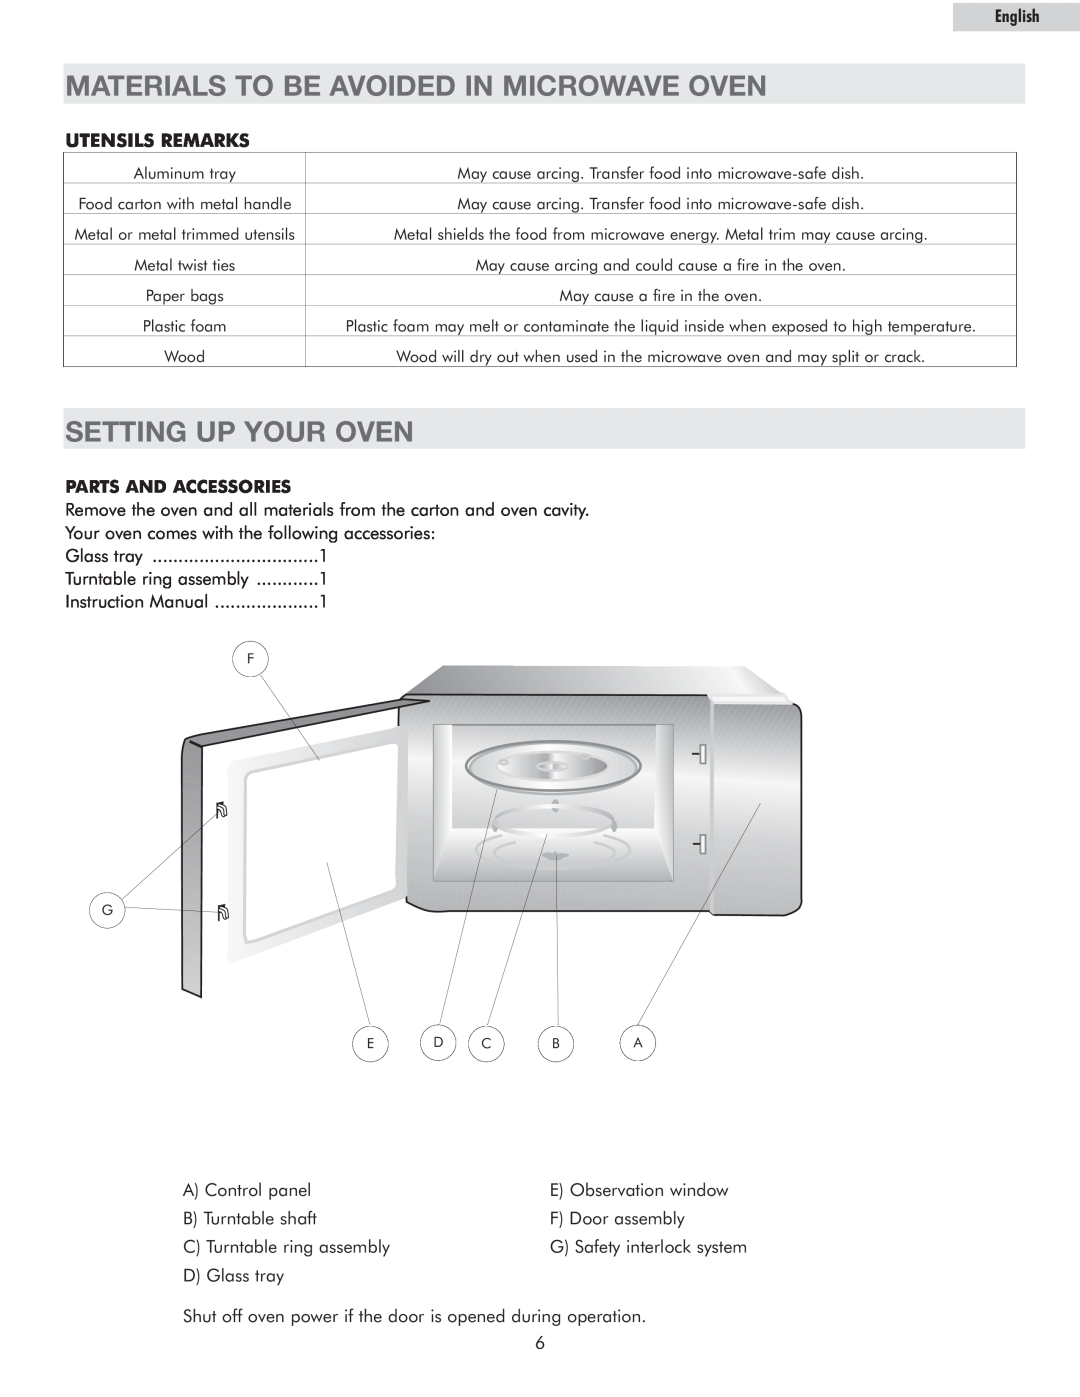 Haier MWM11100TB, MWM11100TW Materials To Be Avoided In Microwave Oven, Setting Up Your Oven, Utensils Remarks, English 